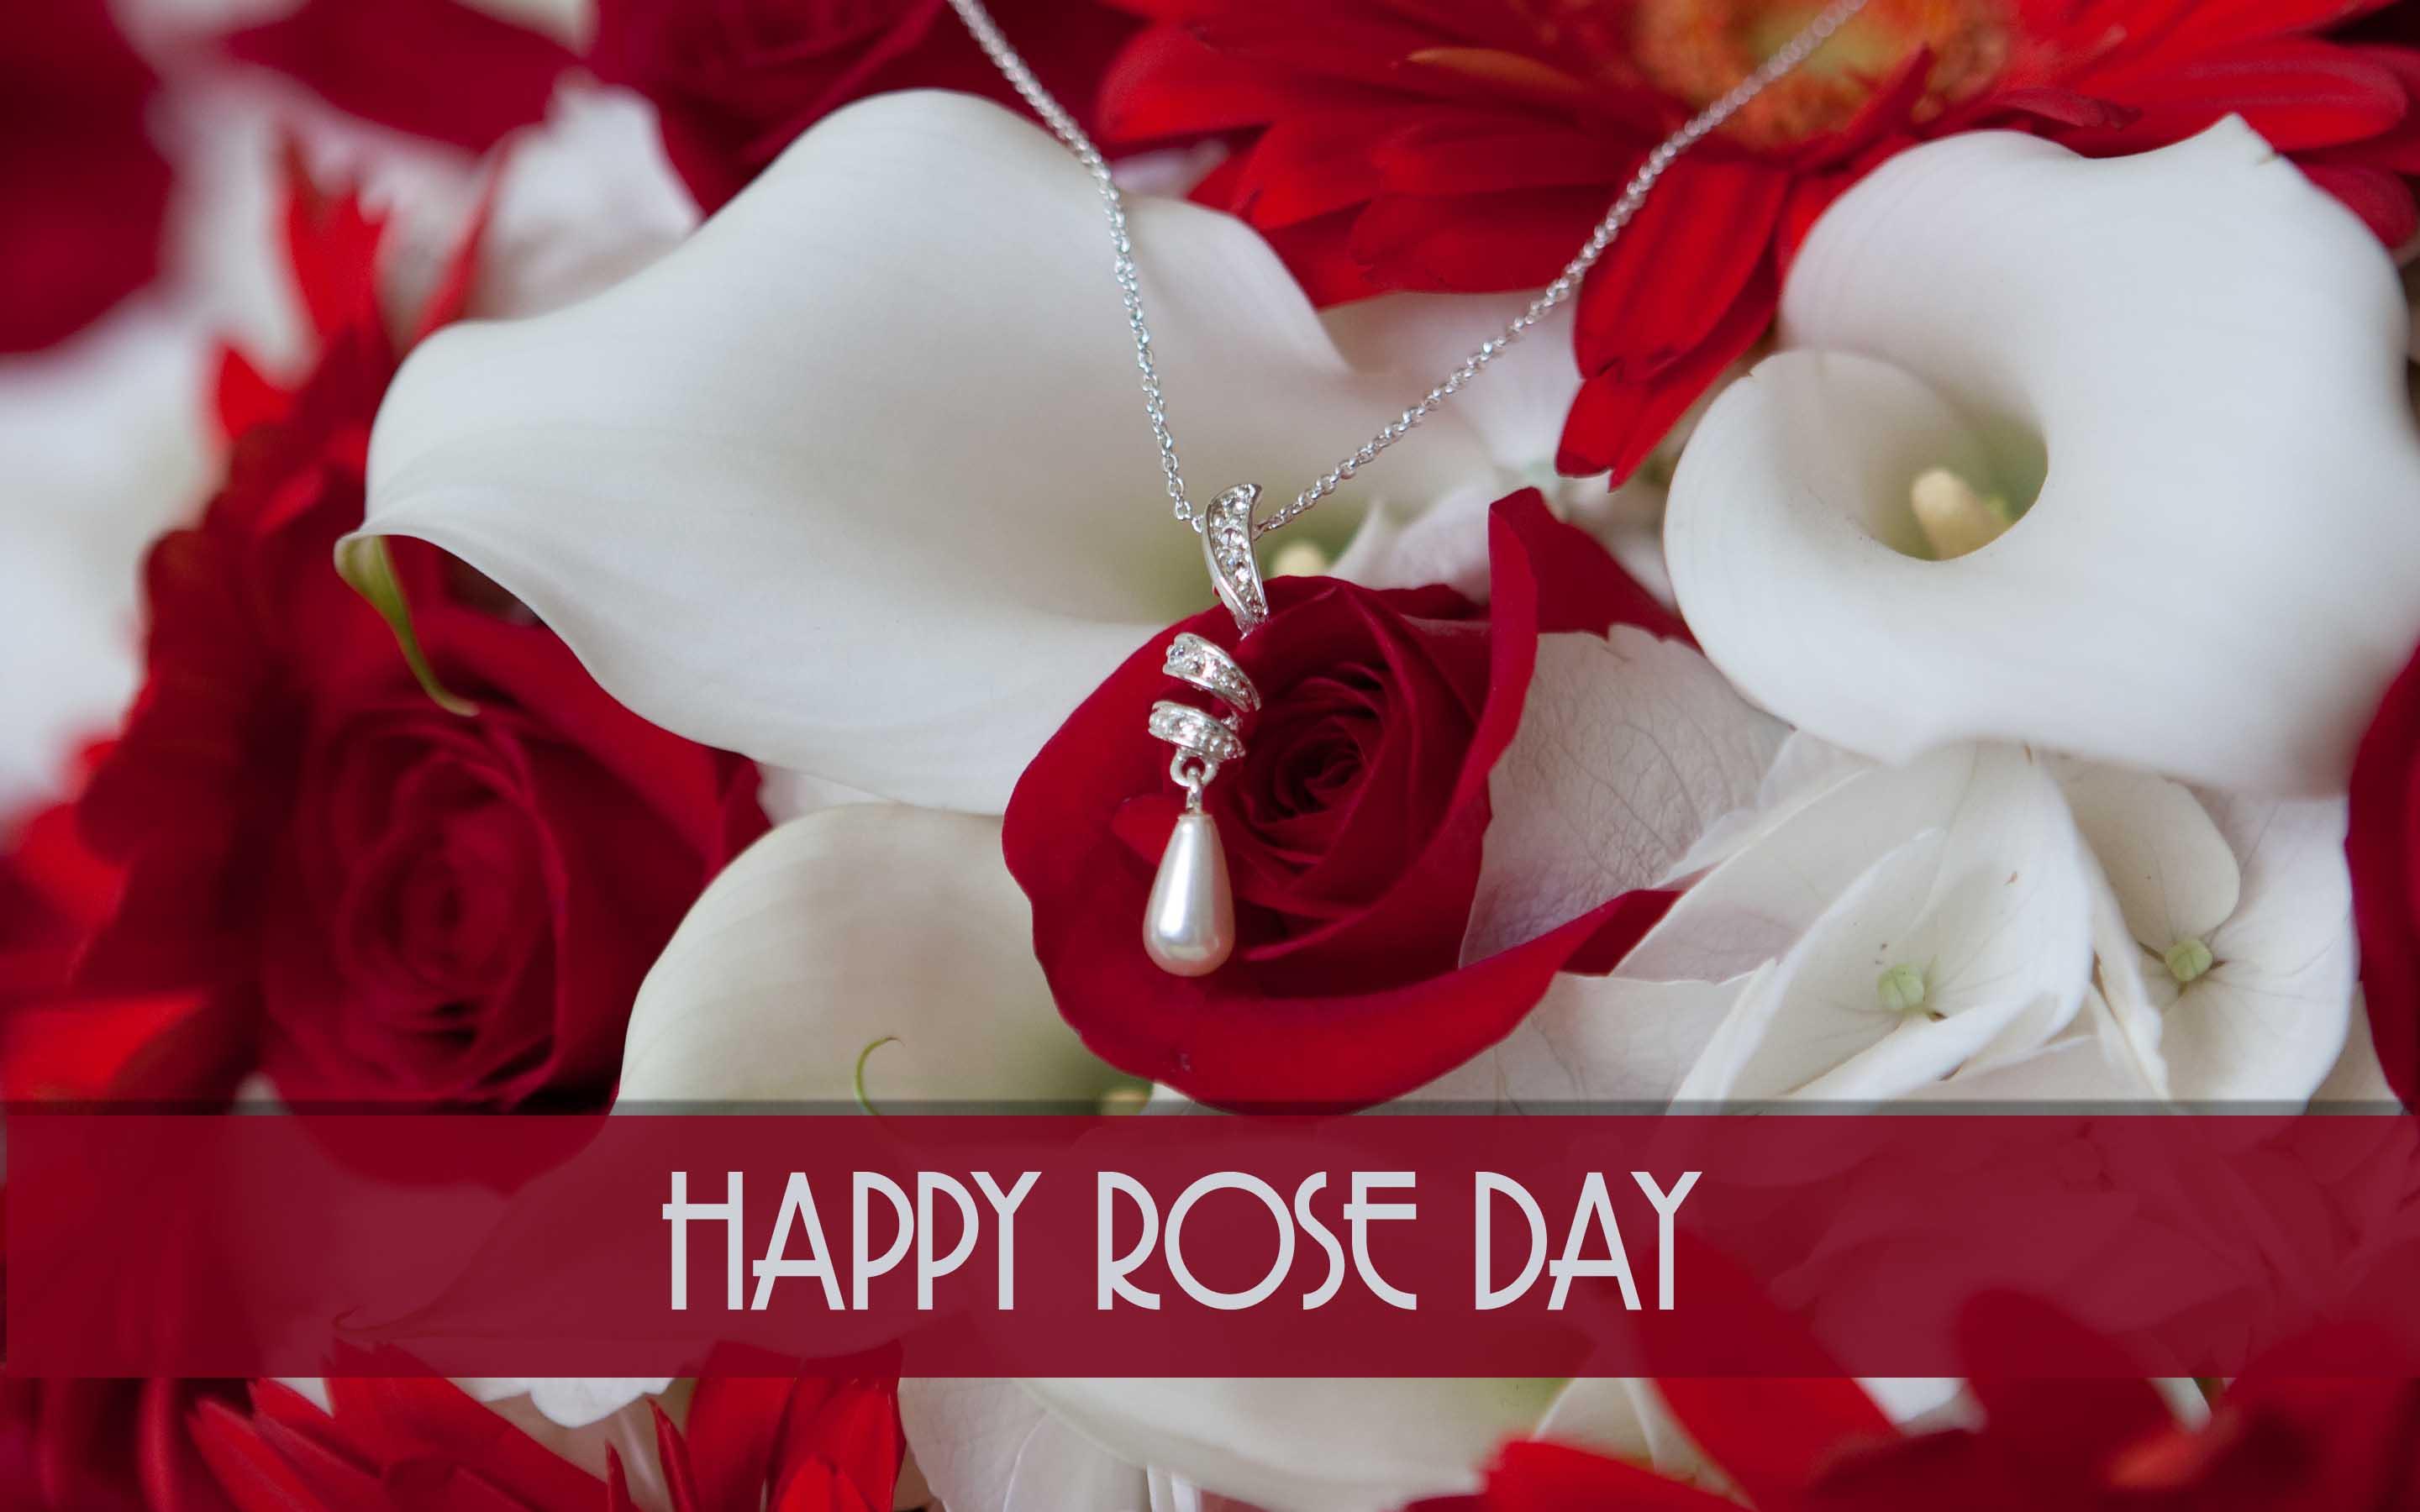 Rose Day Wallpapers - Wallpaper Cave